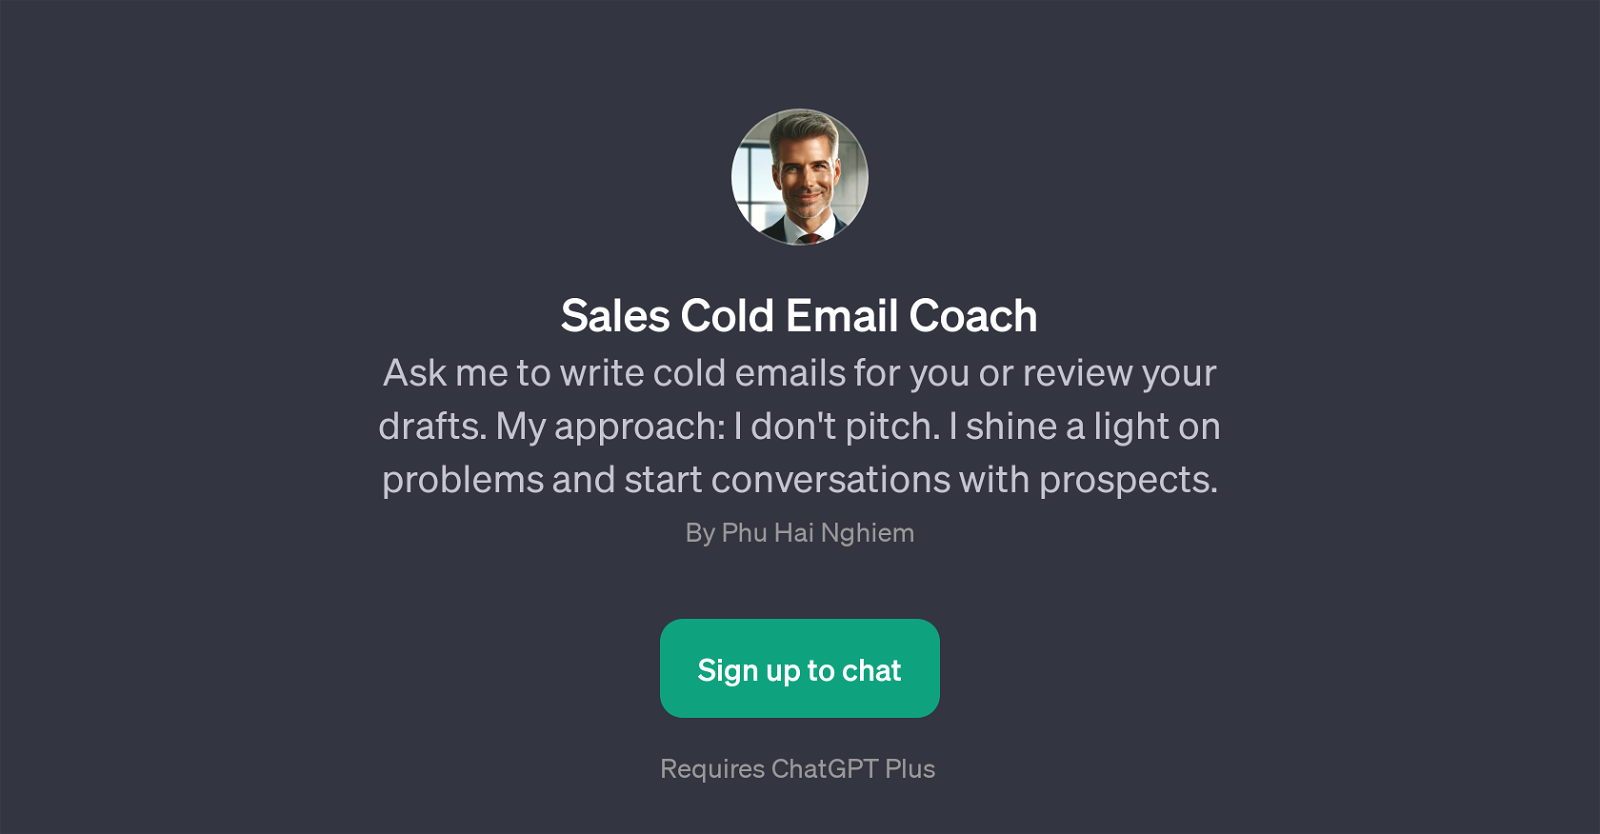 Sales Cold Email Coach website